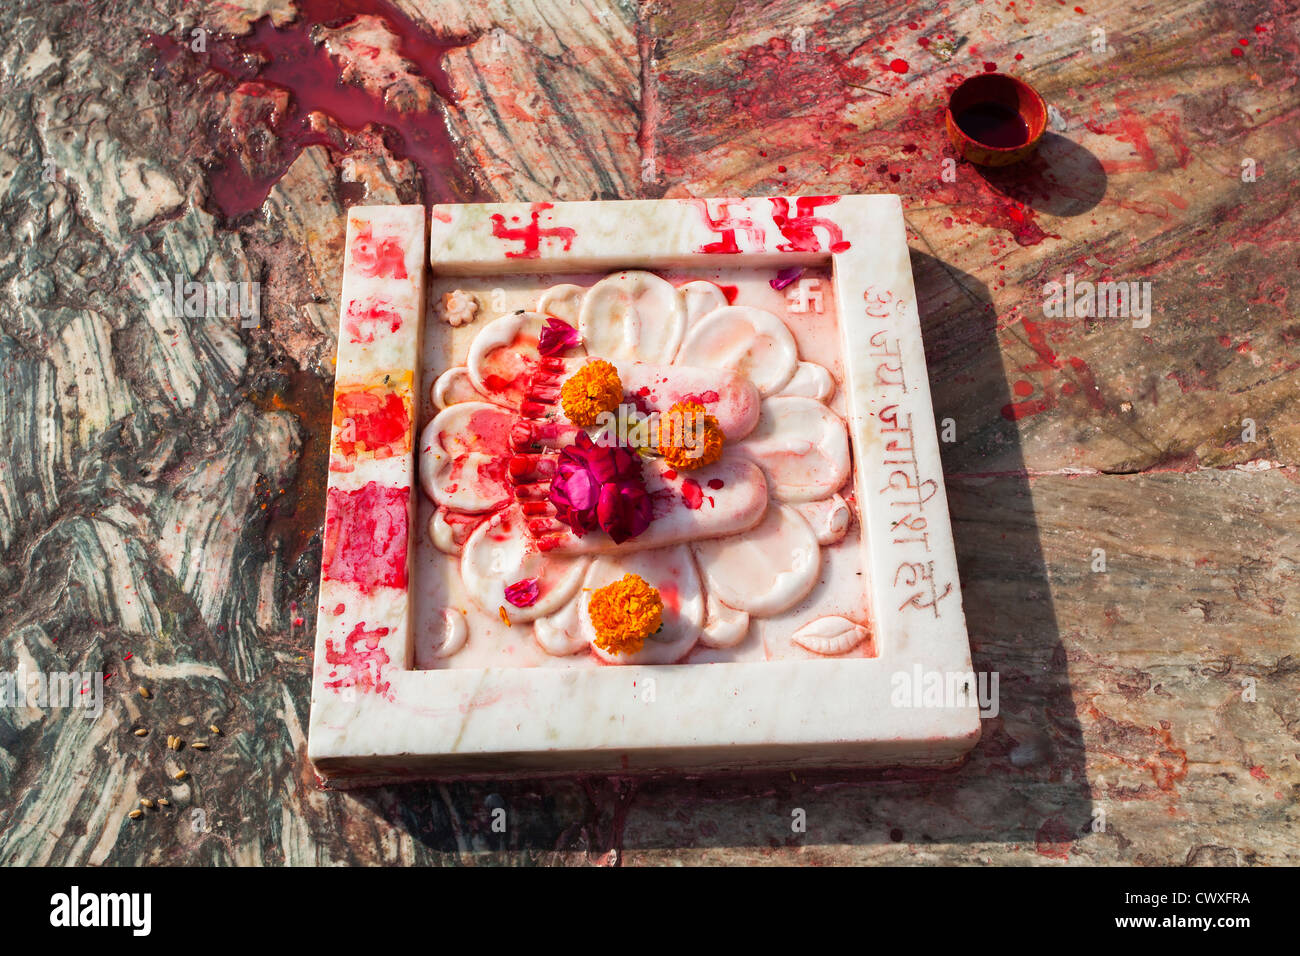 Hindu religious devotion objects in temple, Udaipur, India with finger-painted swastikas Stock Photo